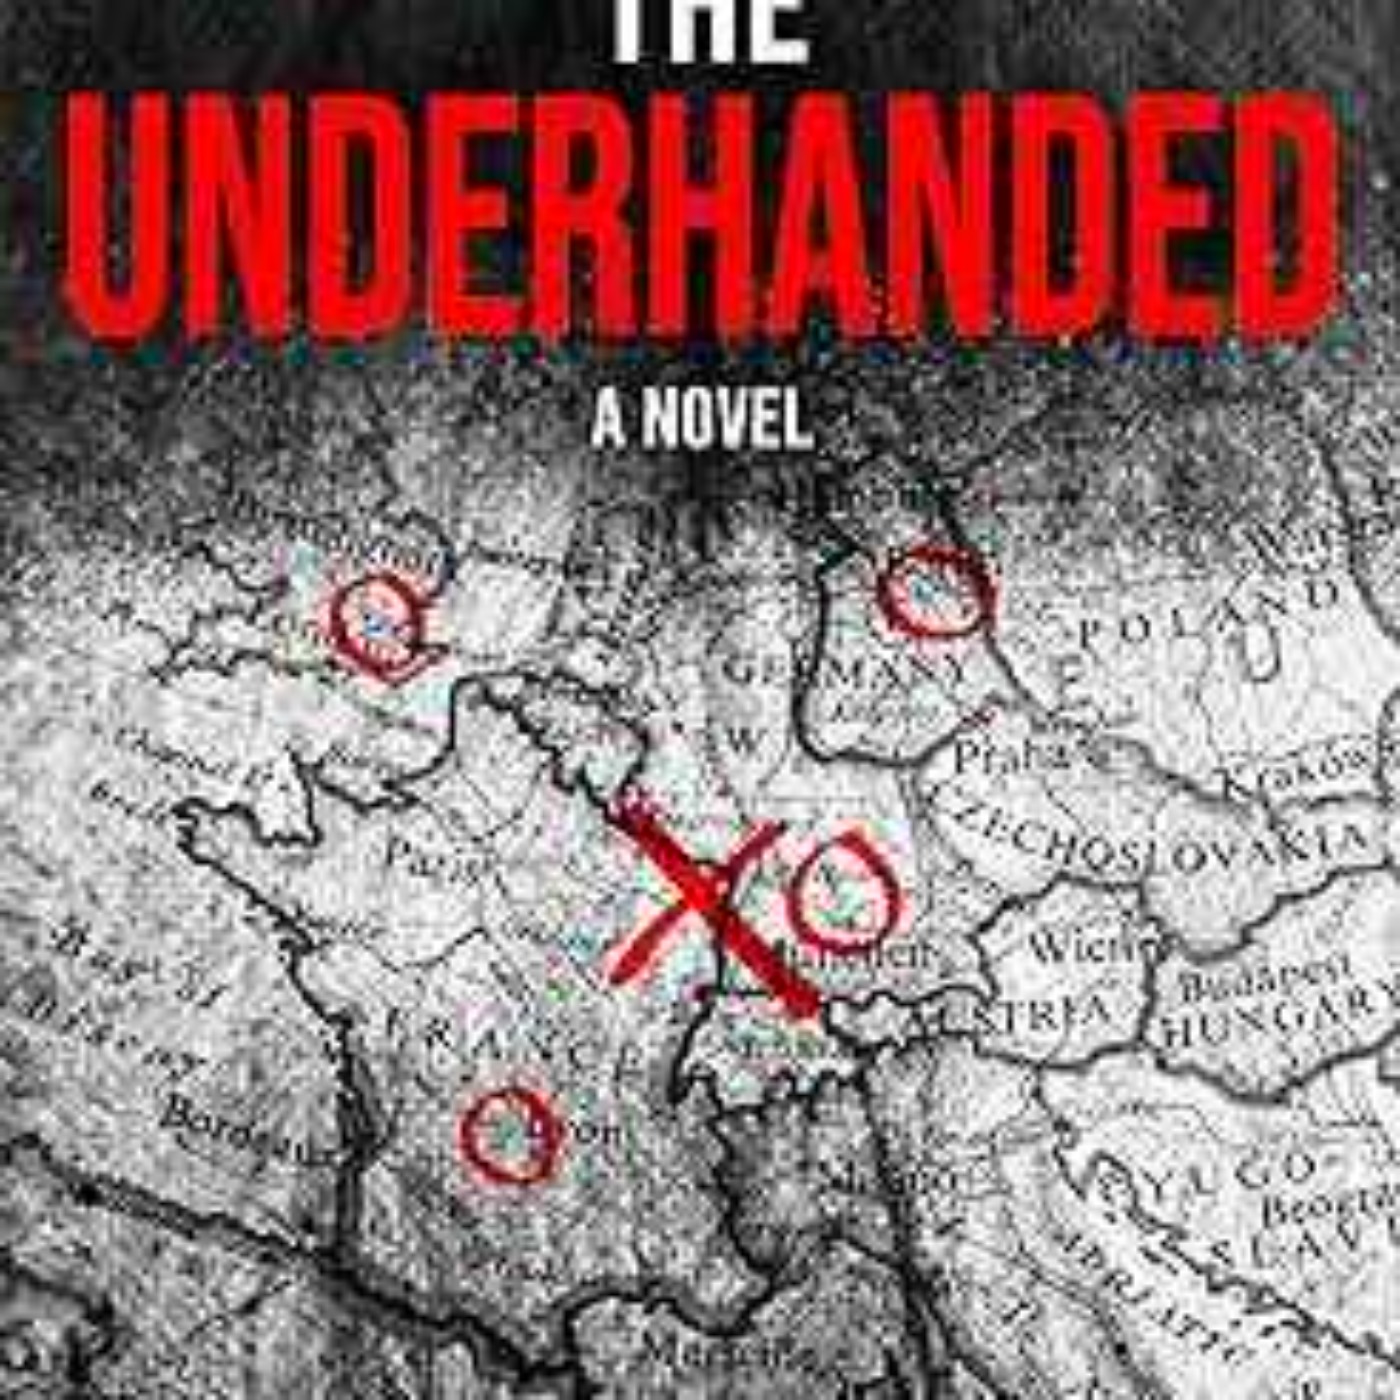 Adam Sikes - The Underhanded